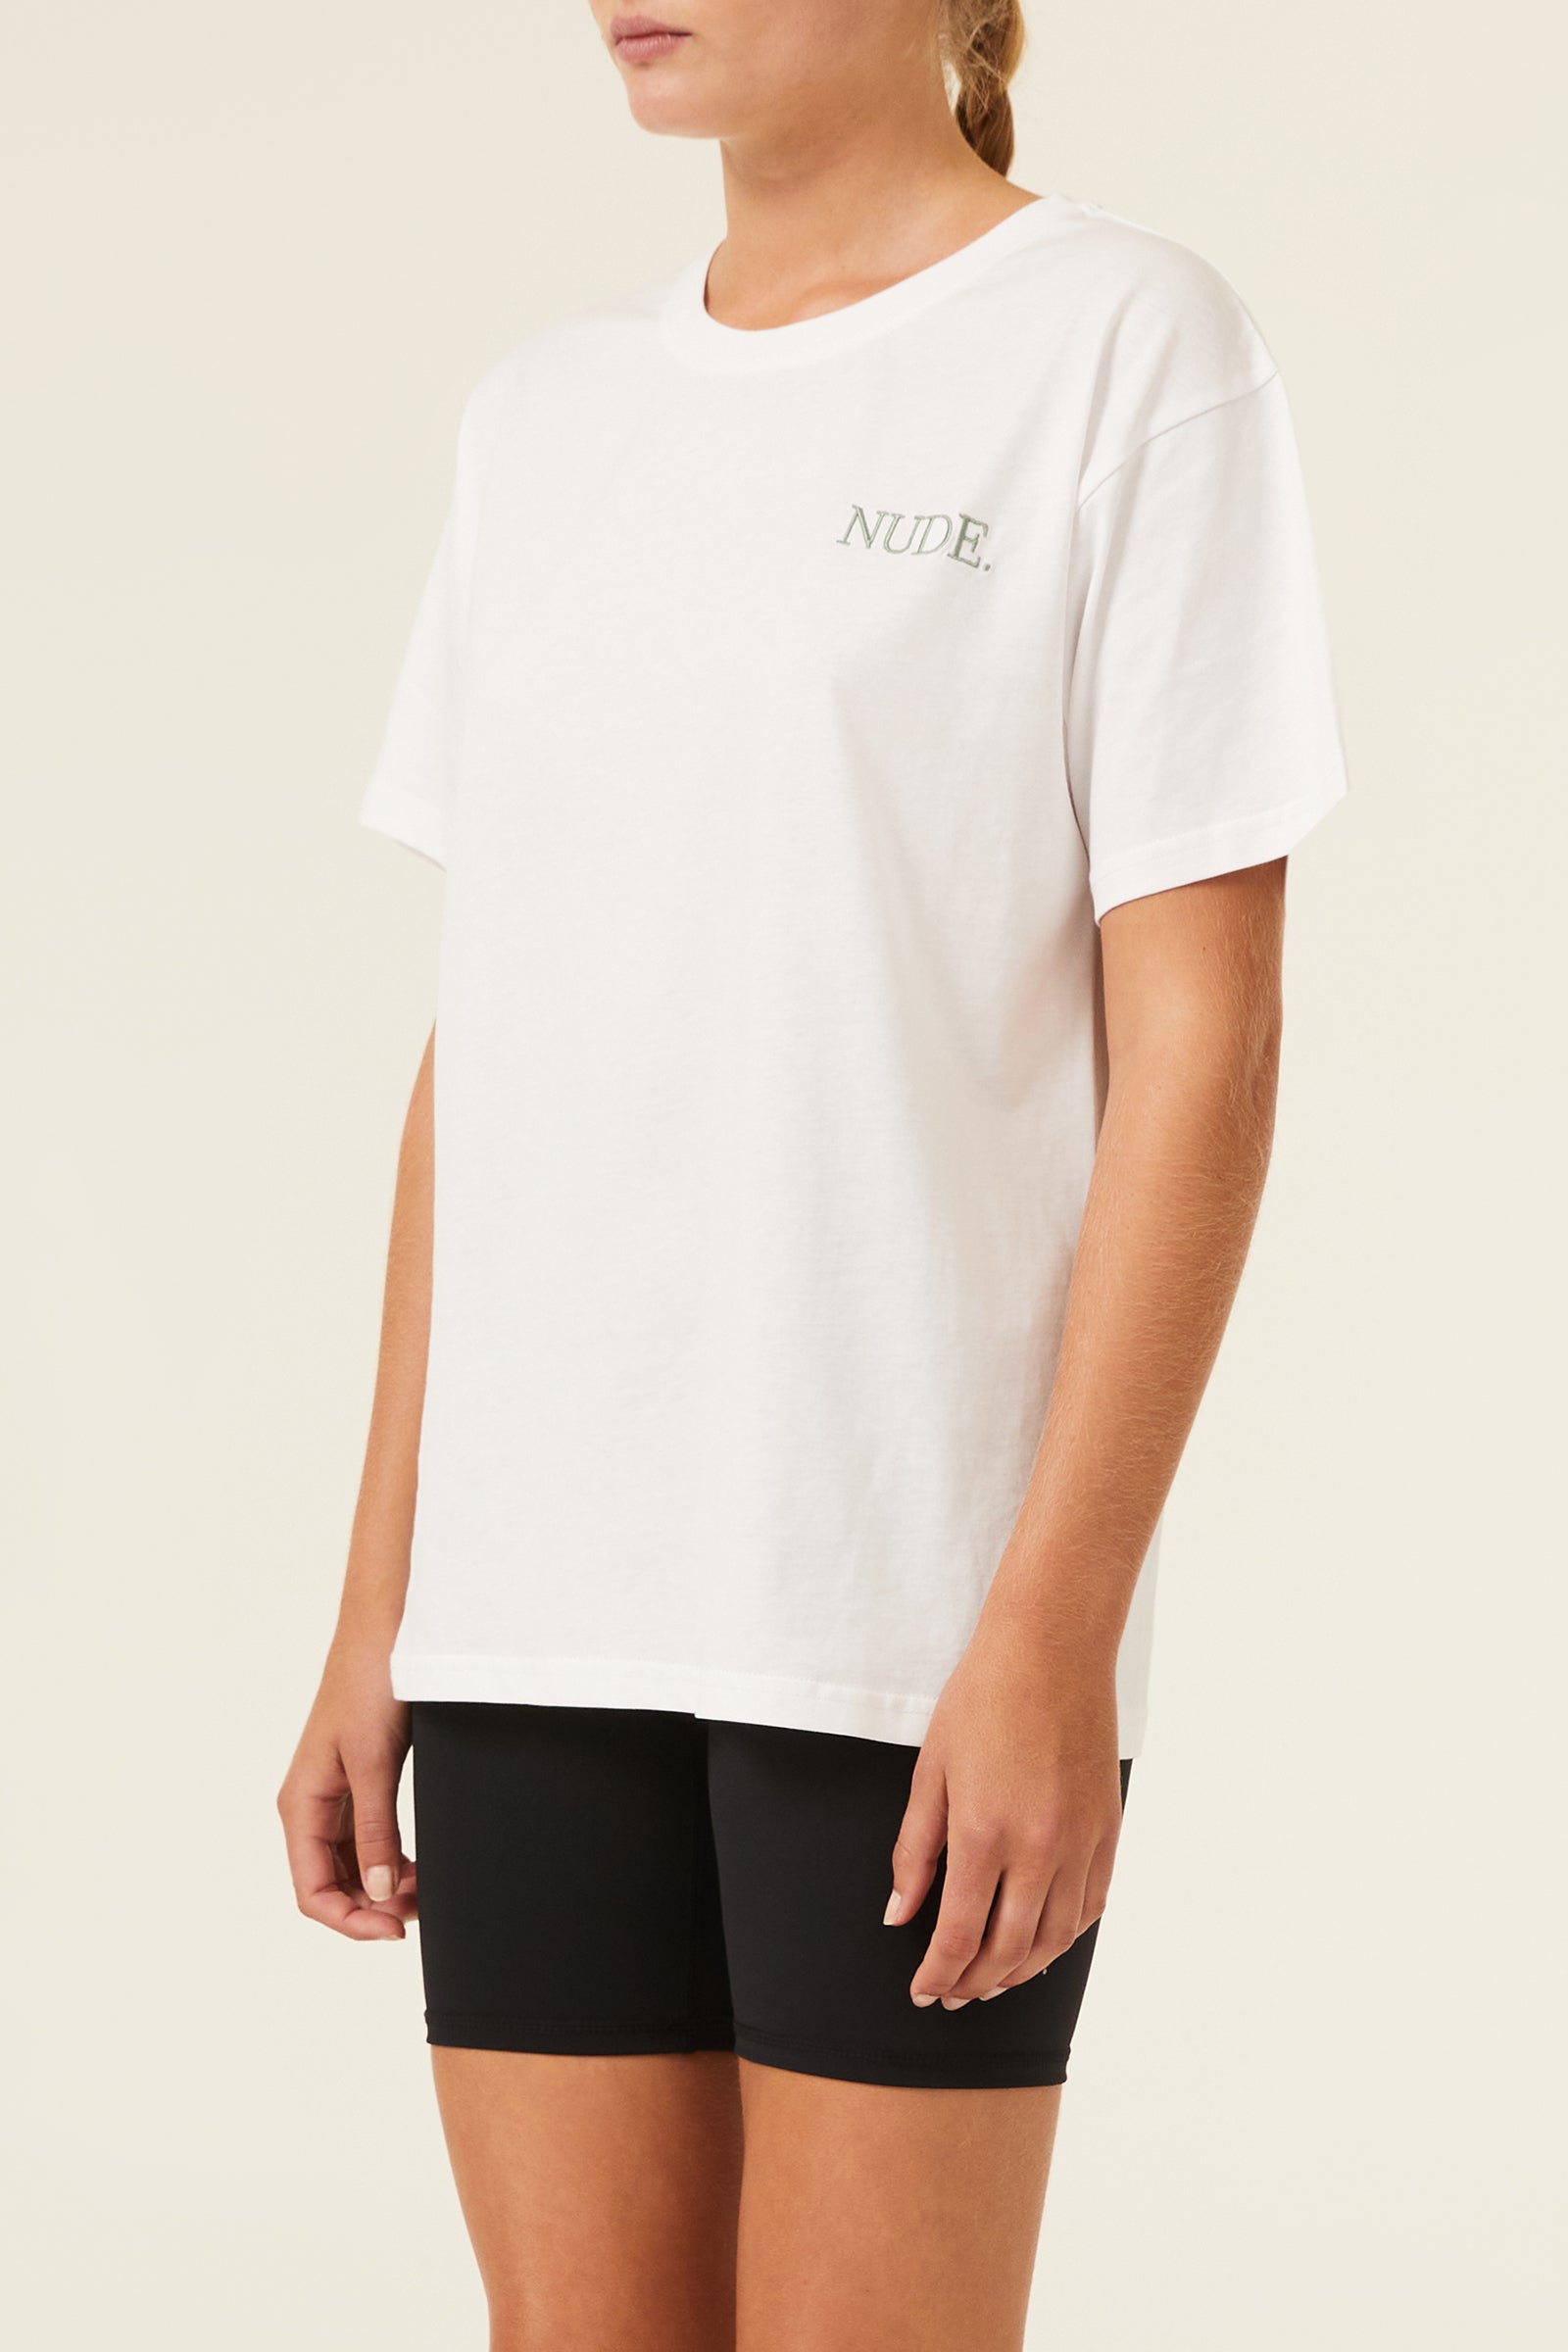 Nude Lucy Iwd Tee In White 